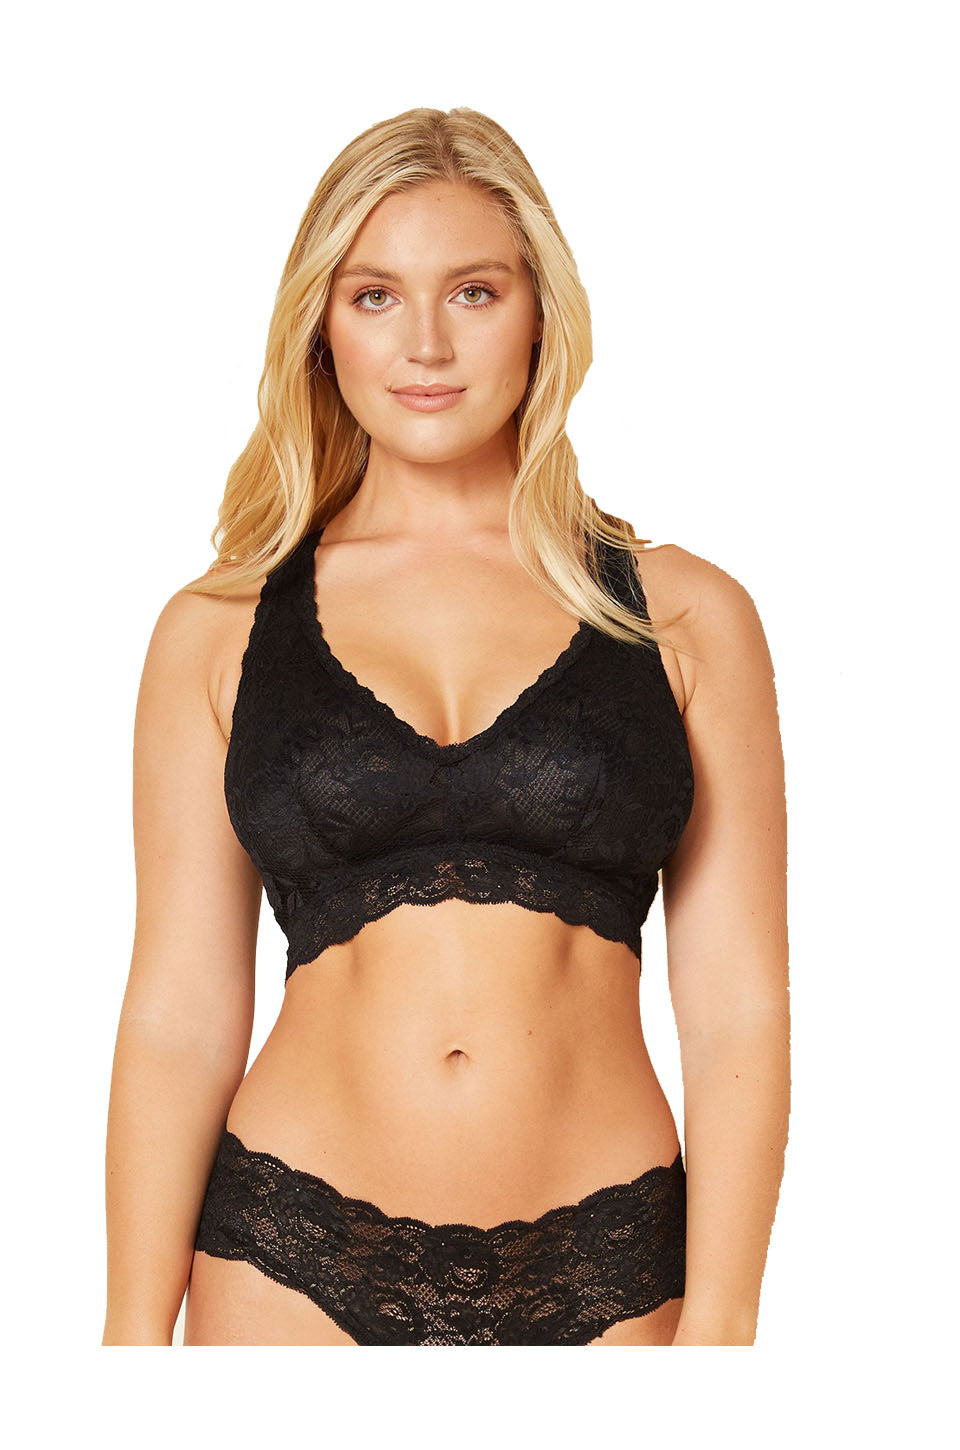 Cosabella Never Say Never Curvy Plungie Longline Bralette in